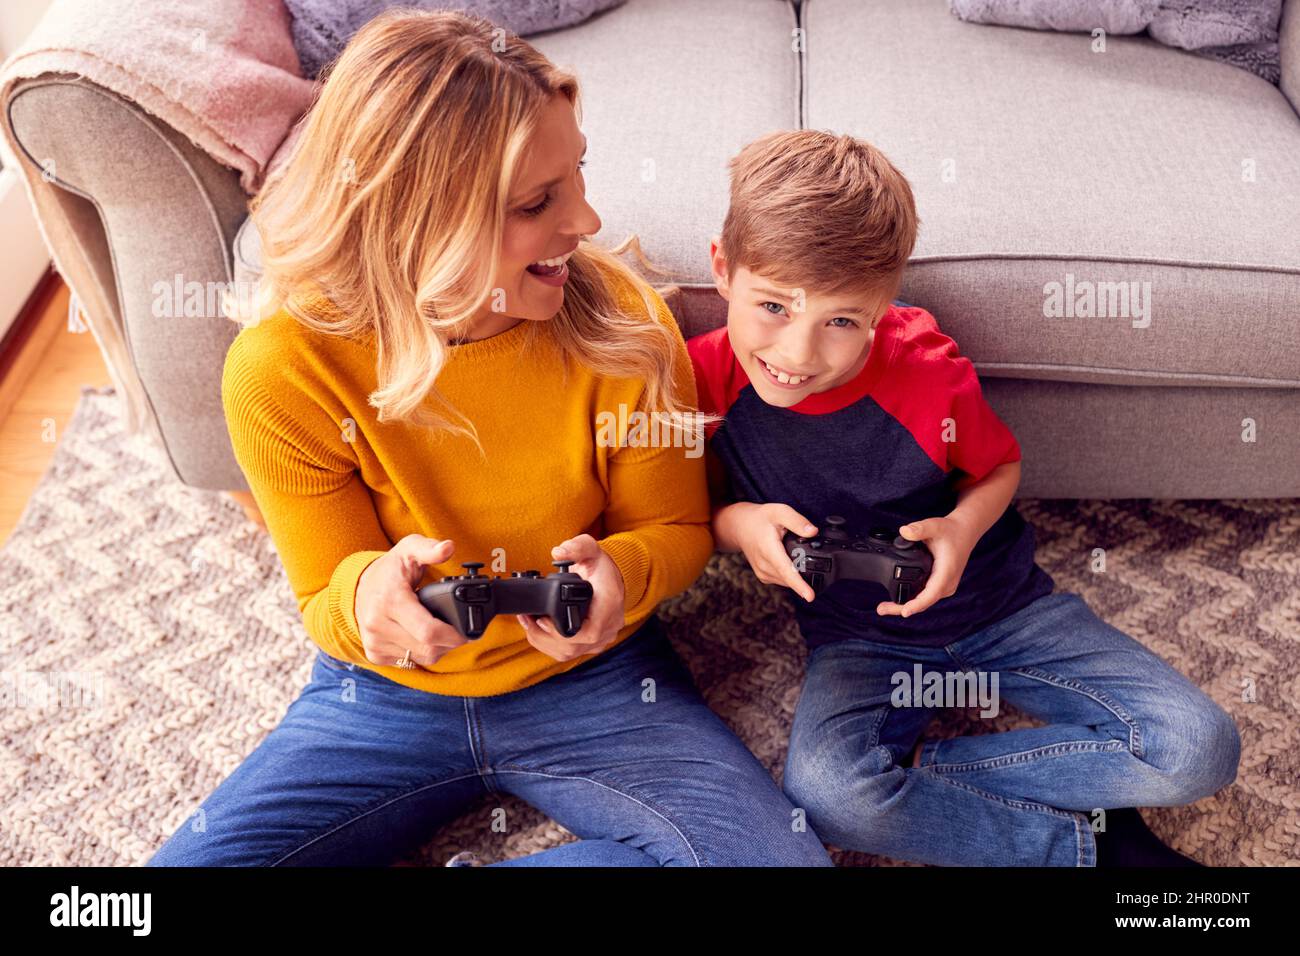 Mother And Son Sitting On Lounge Floor At Home Playing Video Game Together Stock Photo